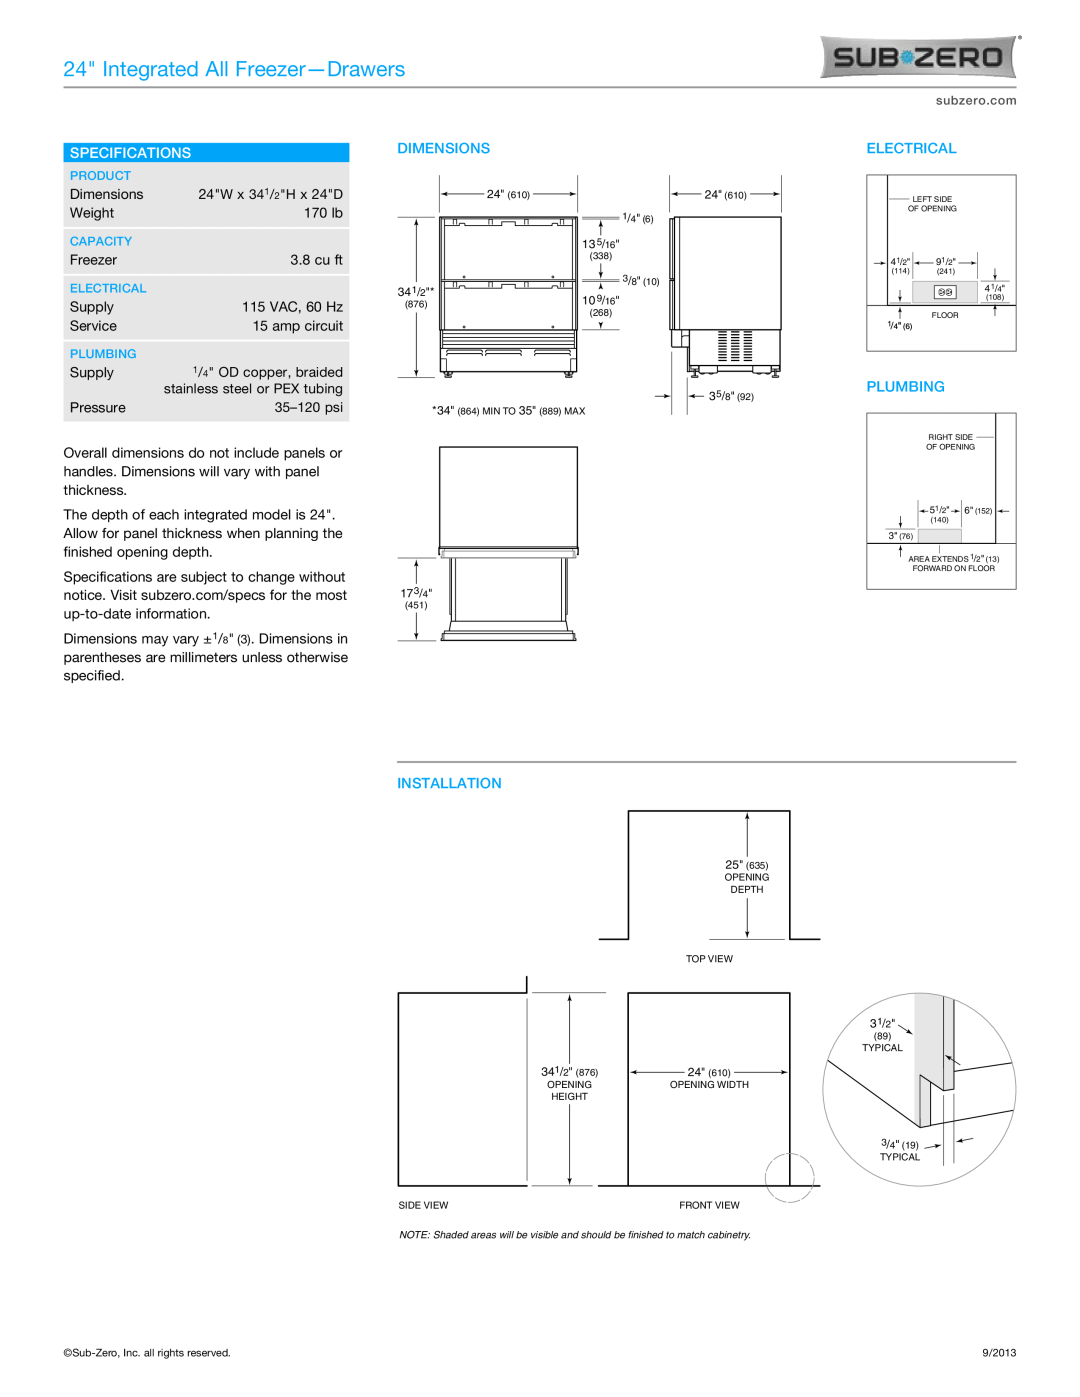 Sub-Zero ID-24FI manual Specifications, Dimensions, Electrical, Plumbing, Installation, Integrated All Freezer-Drawers 